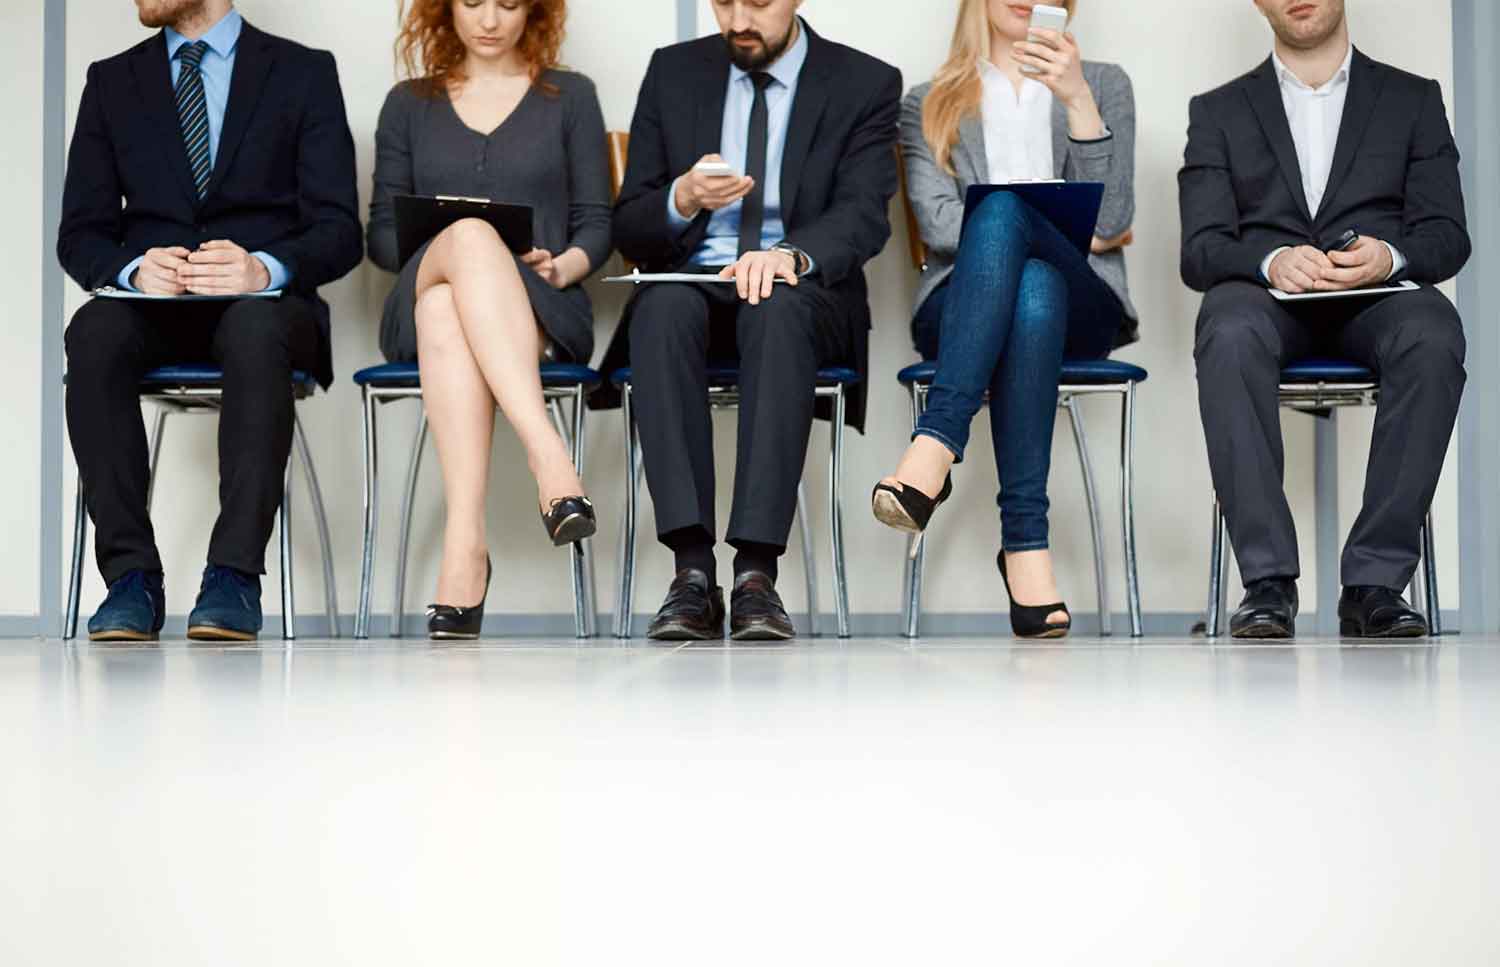 Afraid to hire talent new employees, that's how owners get stuck